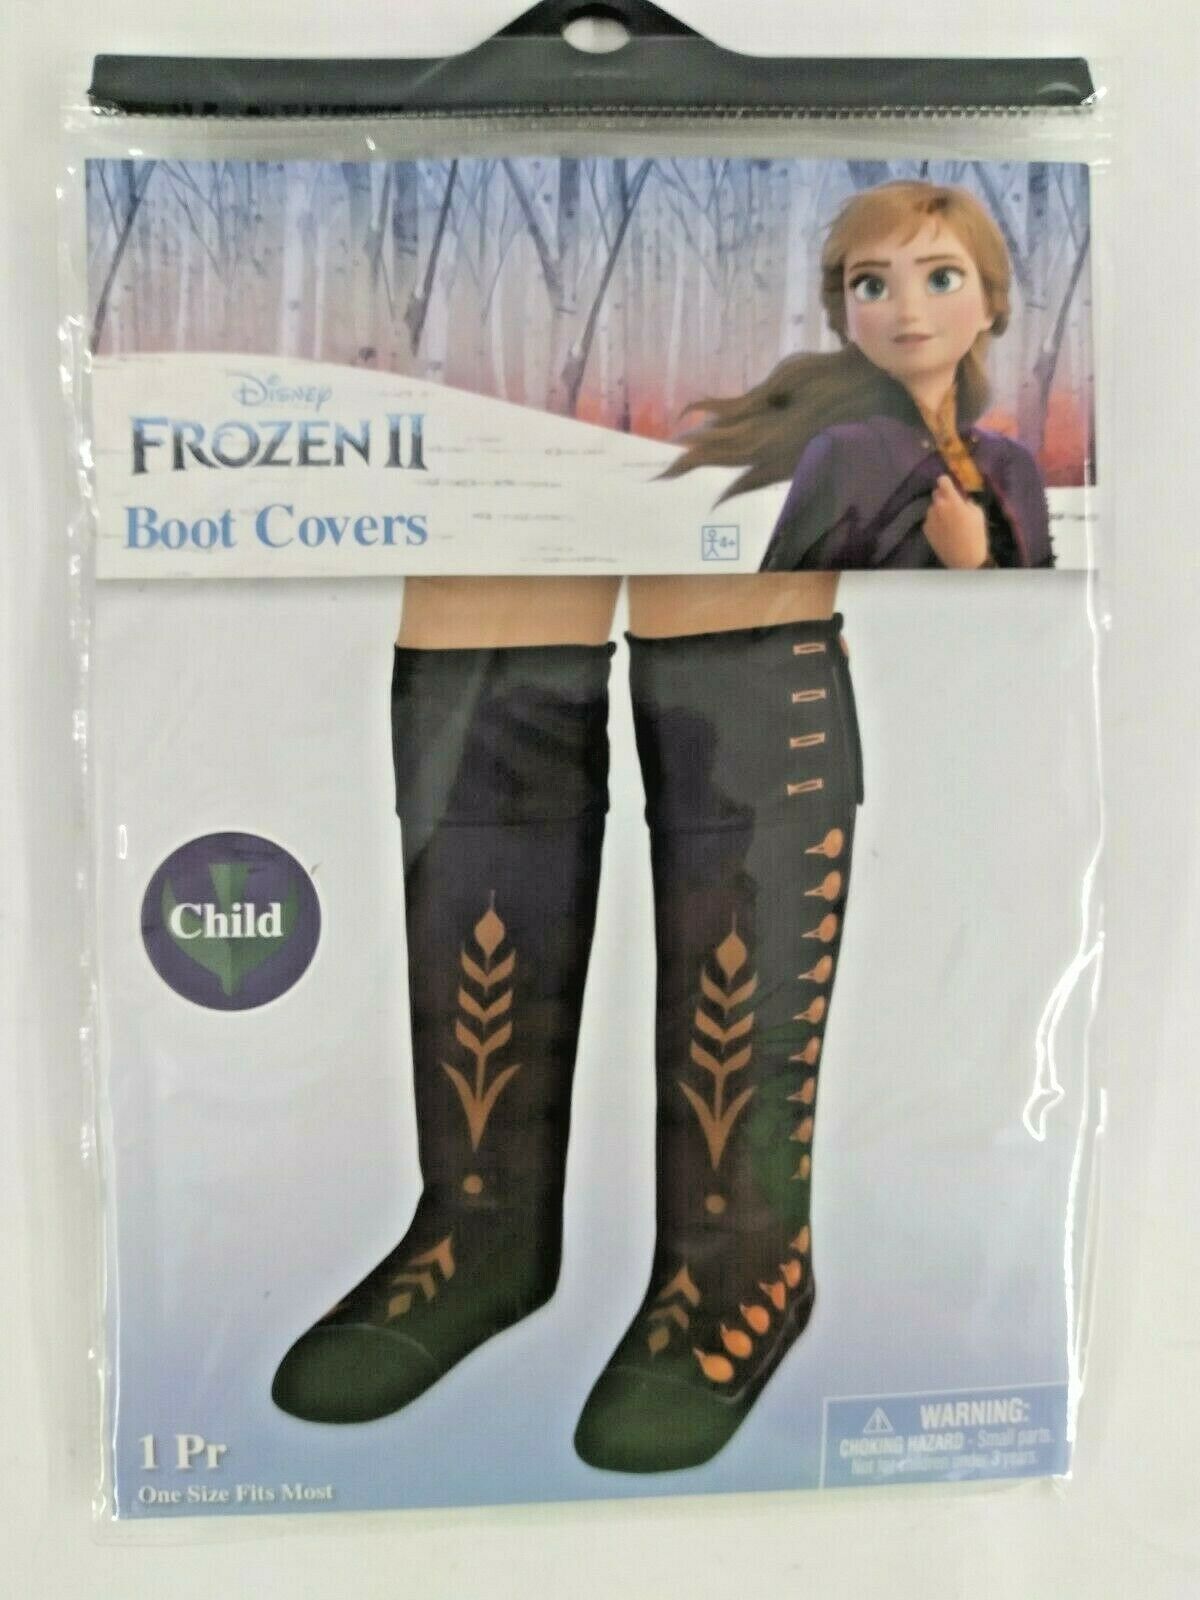 Disney Frozen 2 Boot Covers ~ Princess Anna I PR Child's One Size Fits Most